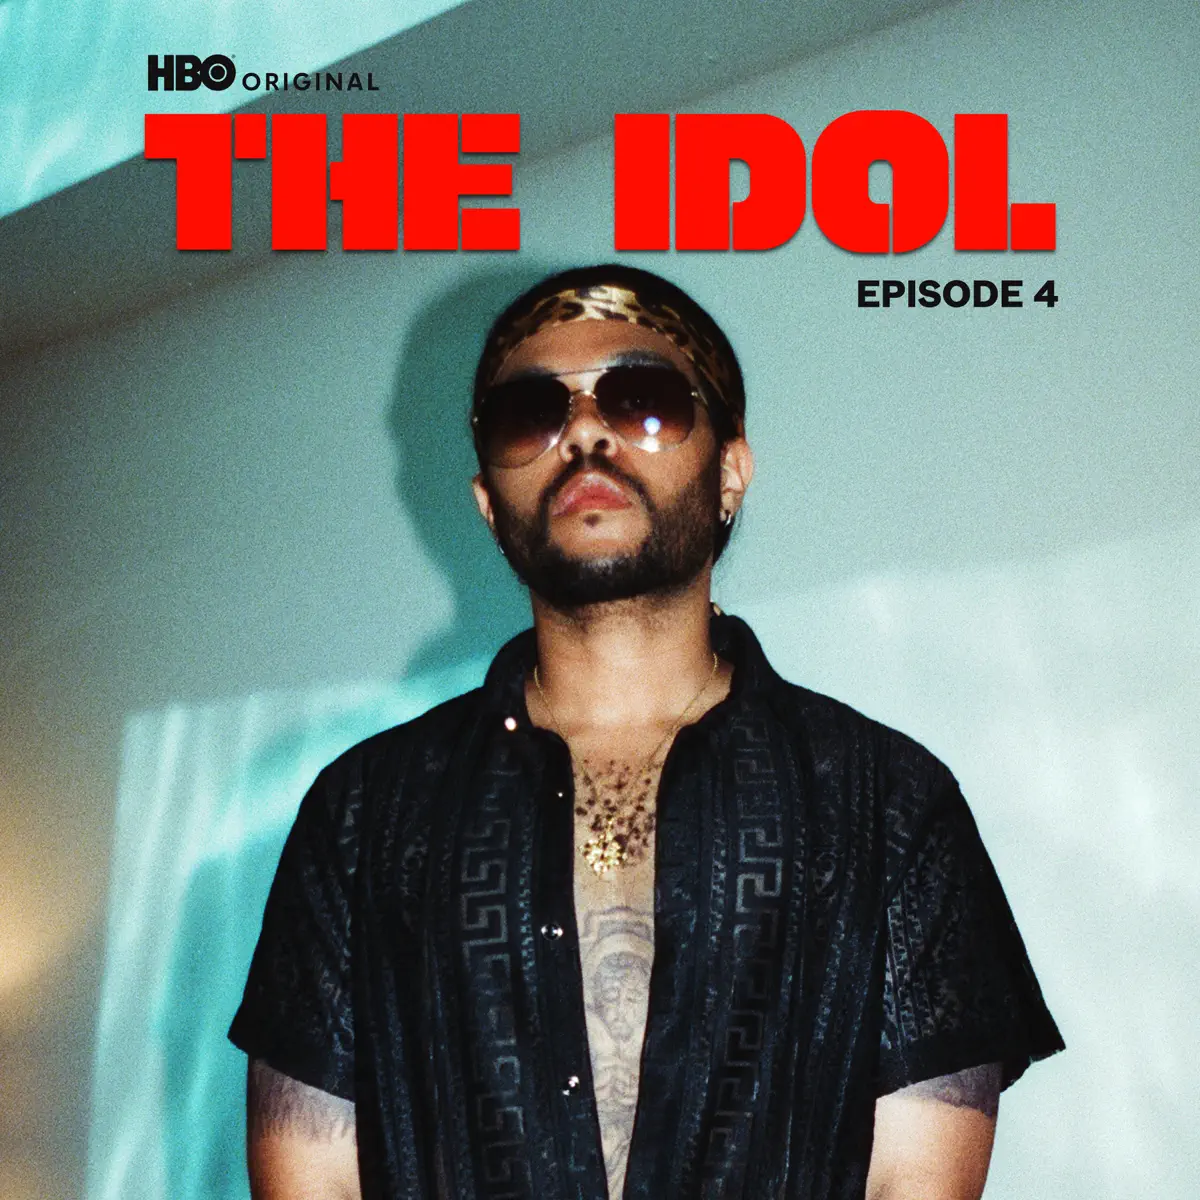 The Weeknd, JENNIE & Lily Rose Depp - The Idol Episode 4 (Music from the HBO Original Series) - Single (2023) [iTunes Plus AAC M4A]-新房子